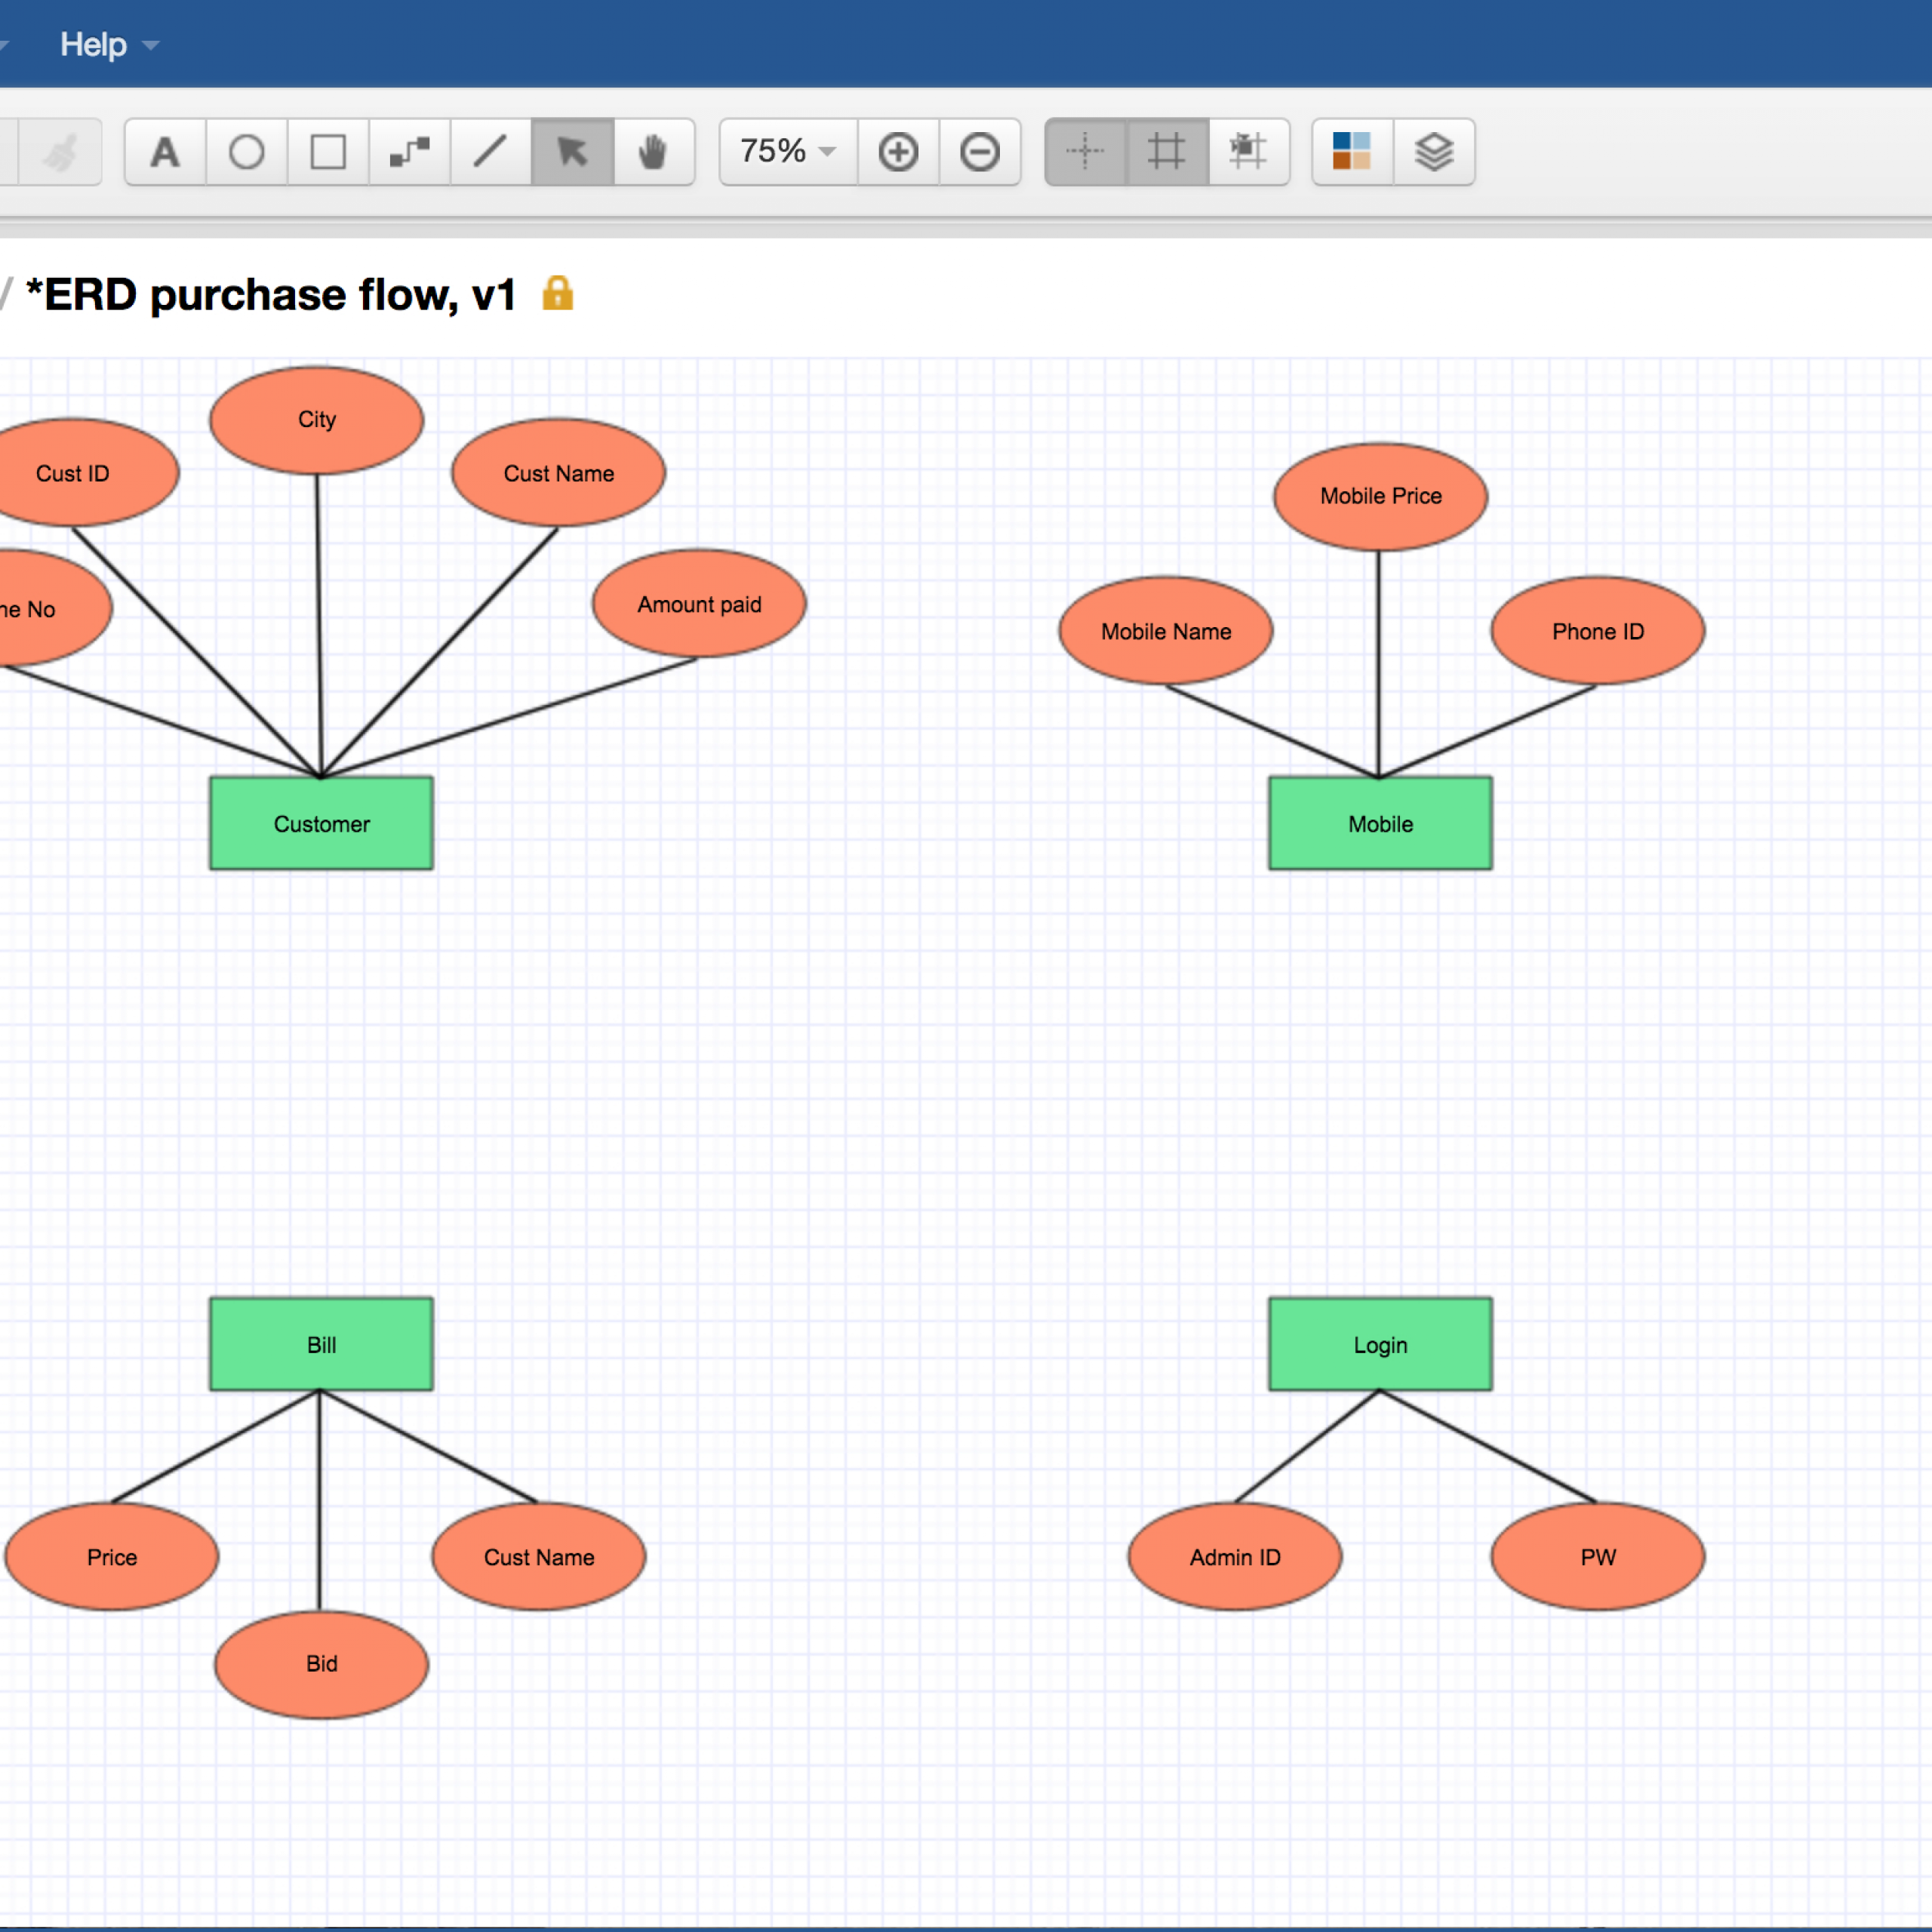 How To Draw An Entity-Relationship Diagram inside Draw Erd Online